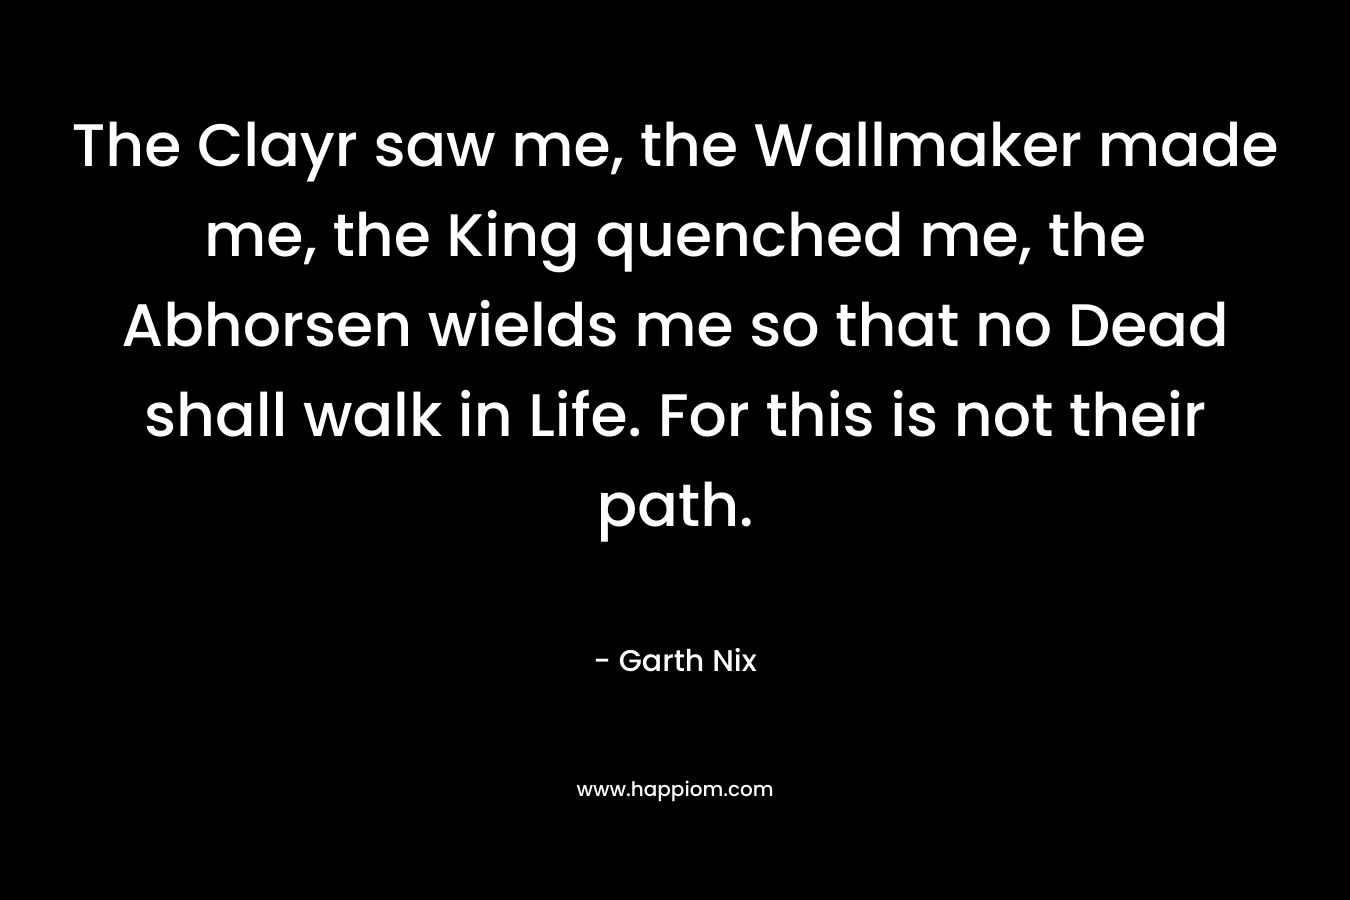 The Clayr saw me, the Wallmaker made me, the King quenched me, the Abhorsen wields me so that no Dead shall walk in Life. For this is not their path. – Garth Nix